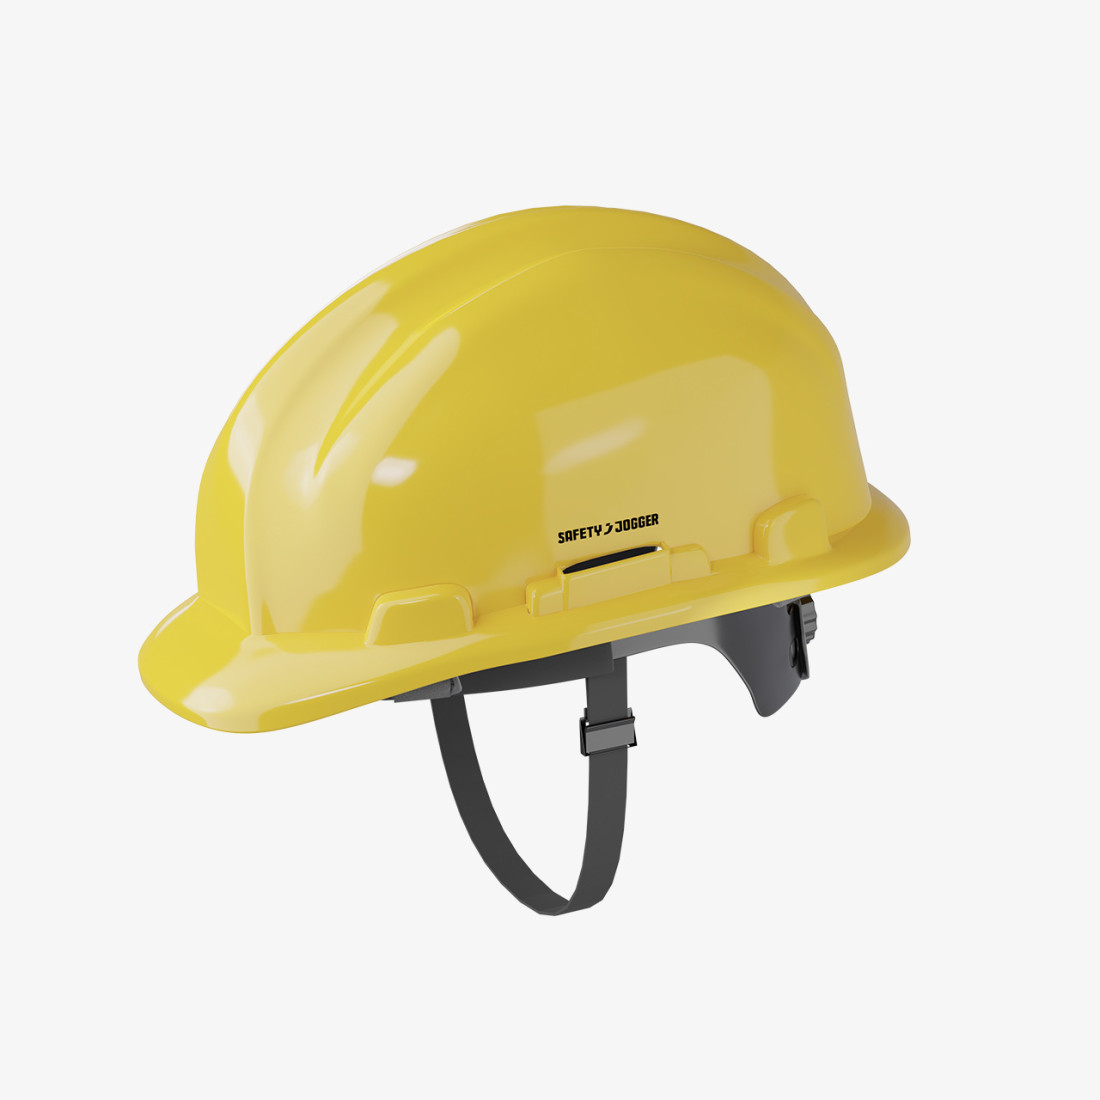 KANHALWS Lightweight Safety Helmet - Personal protection